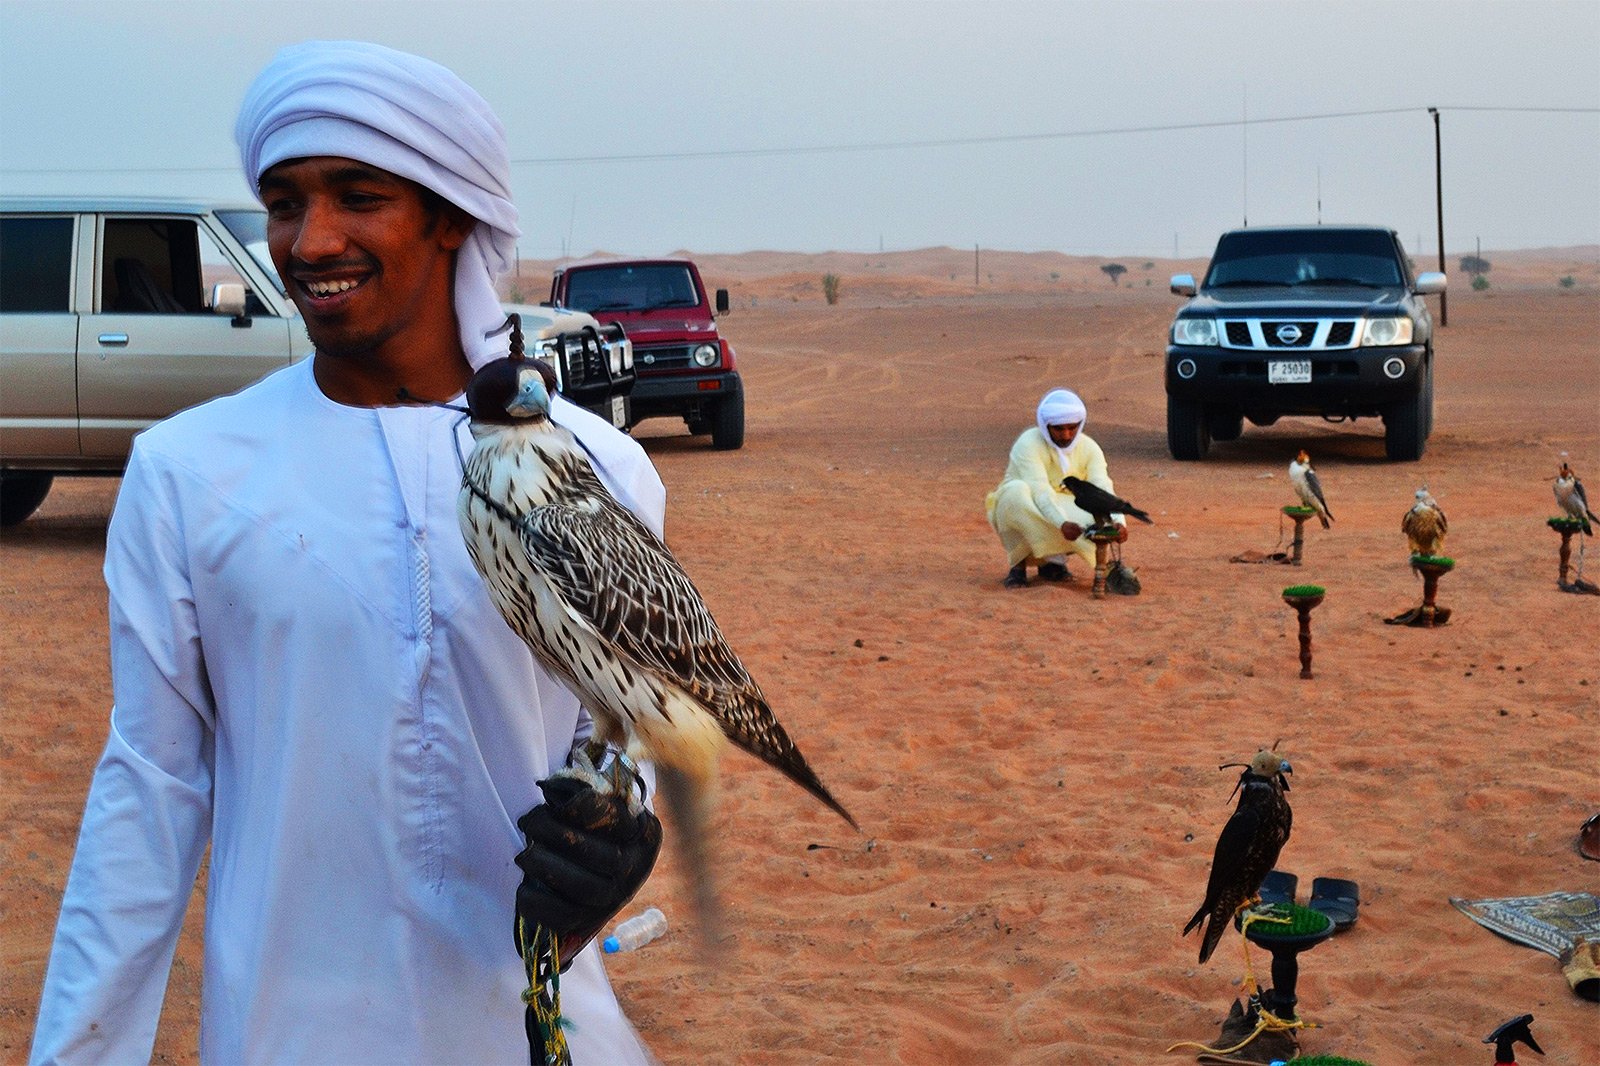 How to attend falconry in Dubai